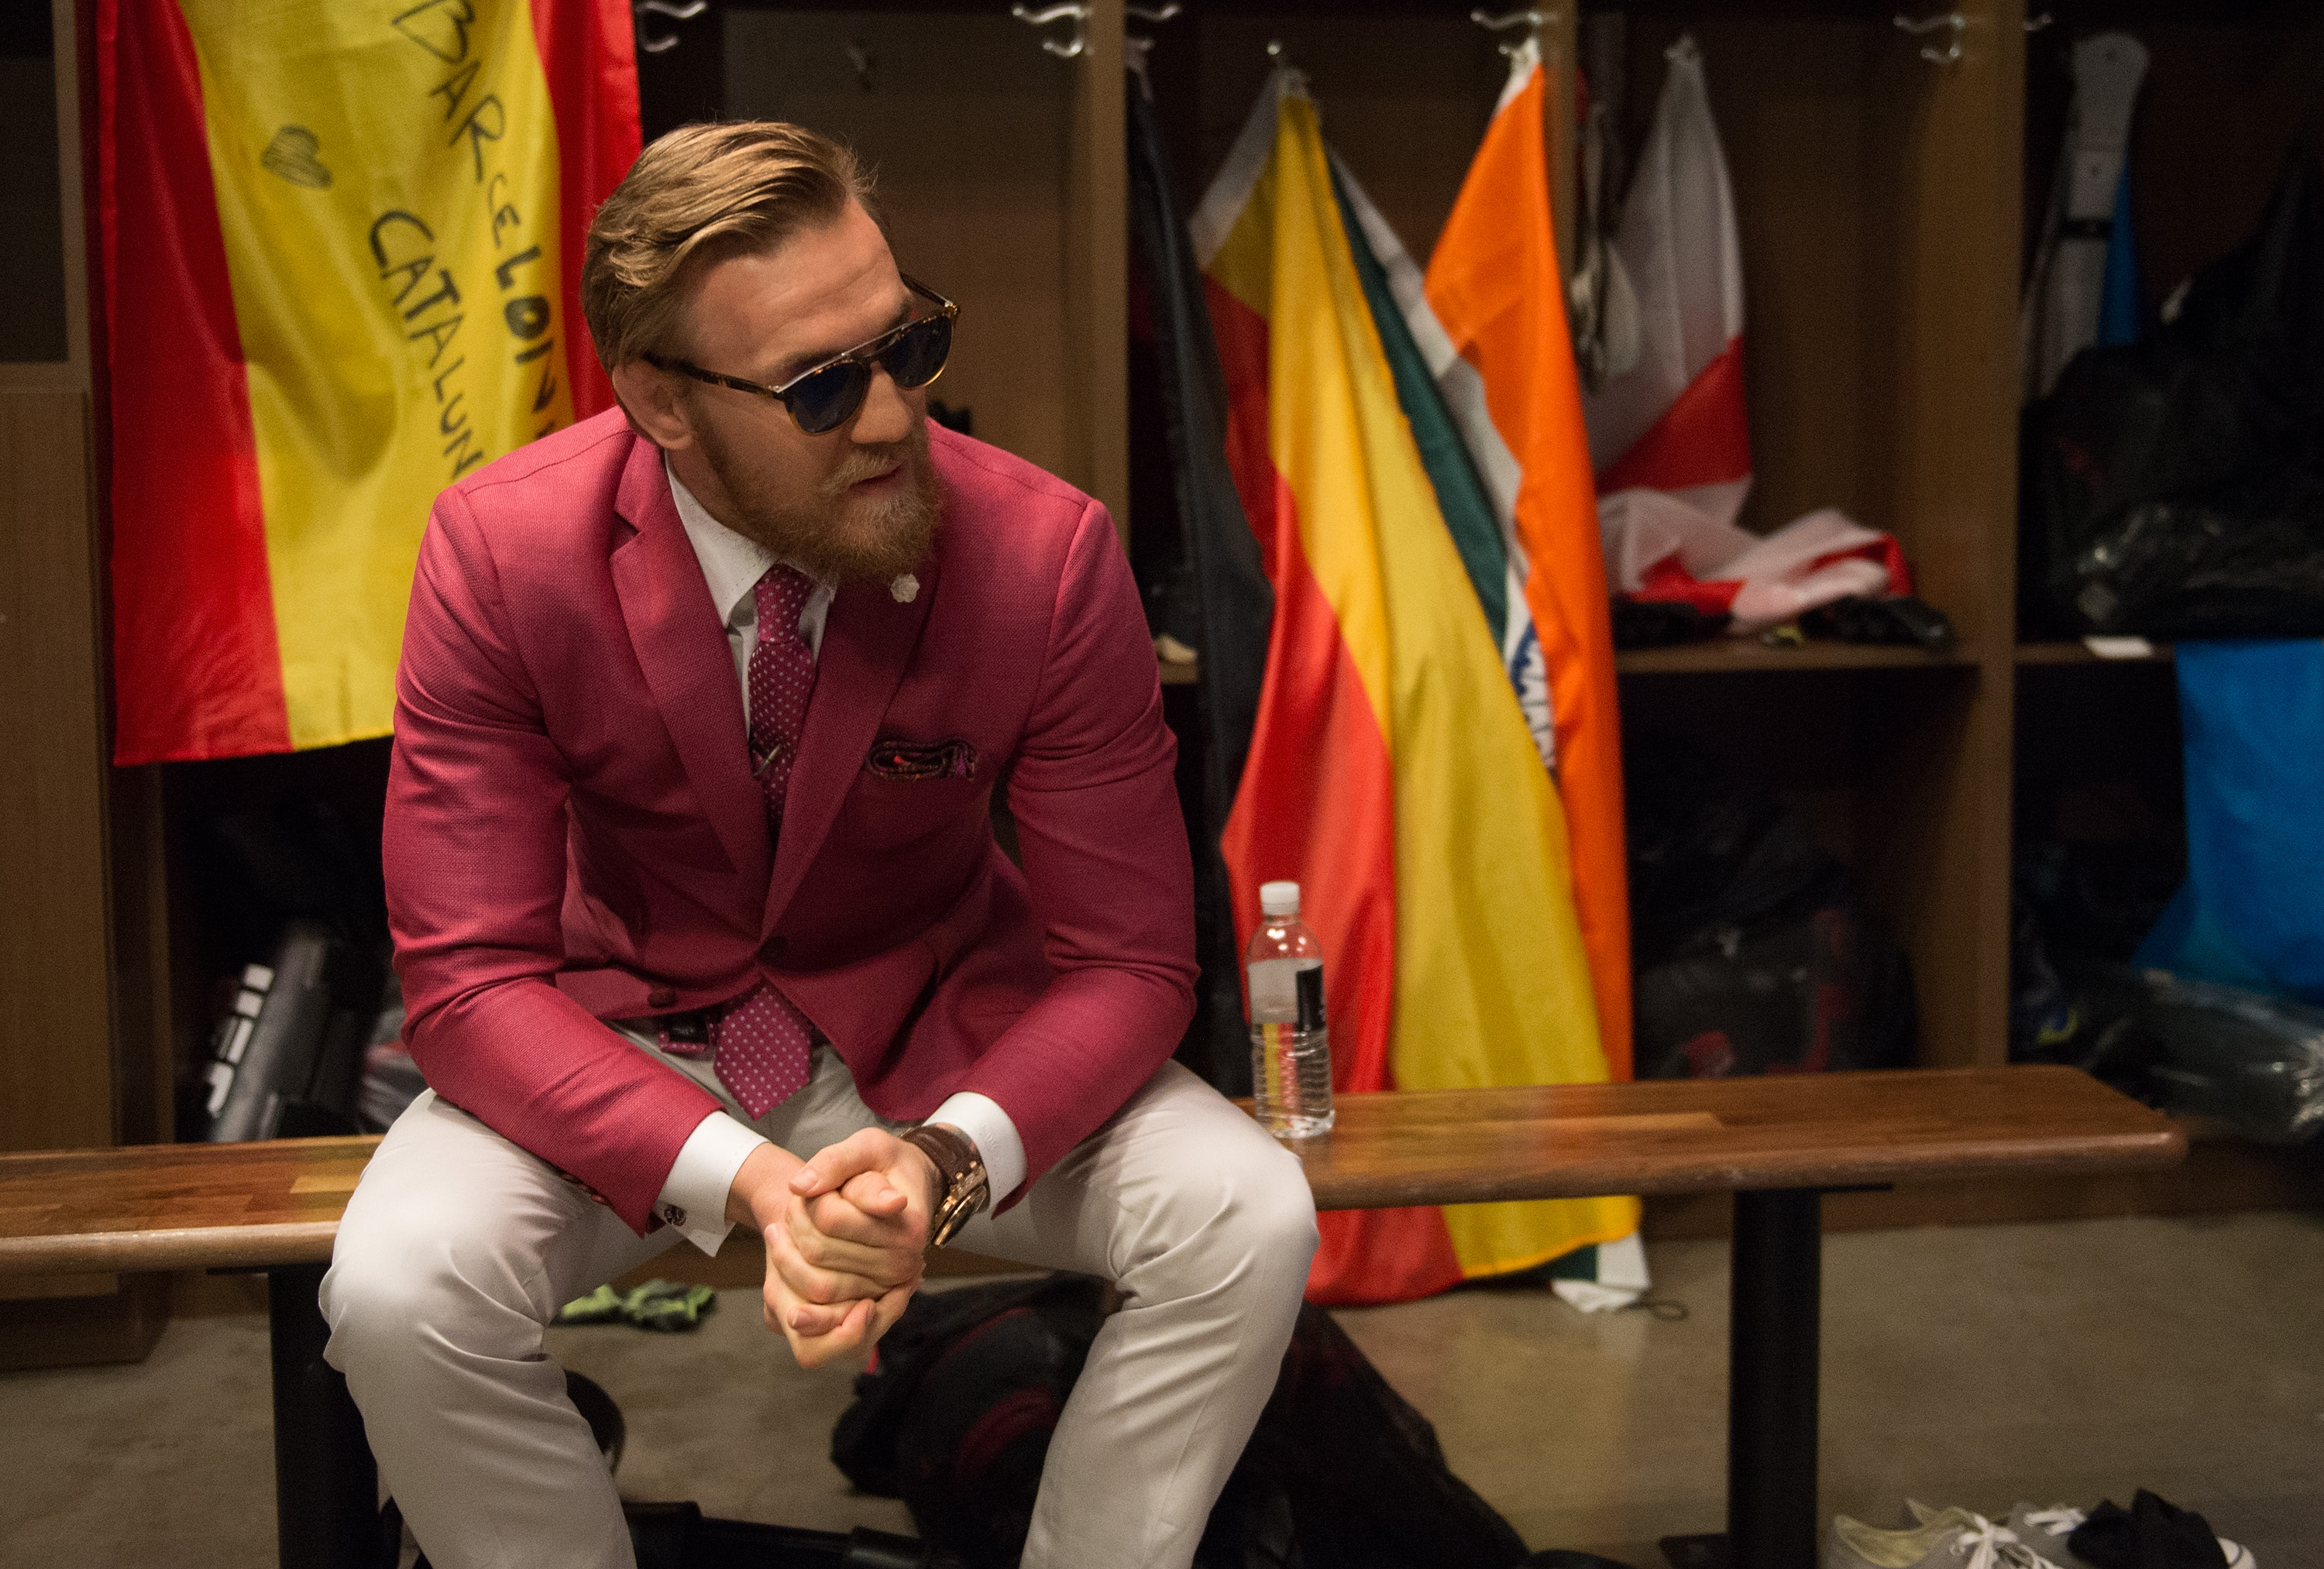 Conor McGregor’s Boujee Watch Collection Is Worth Over $1 Million